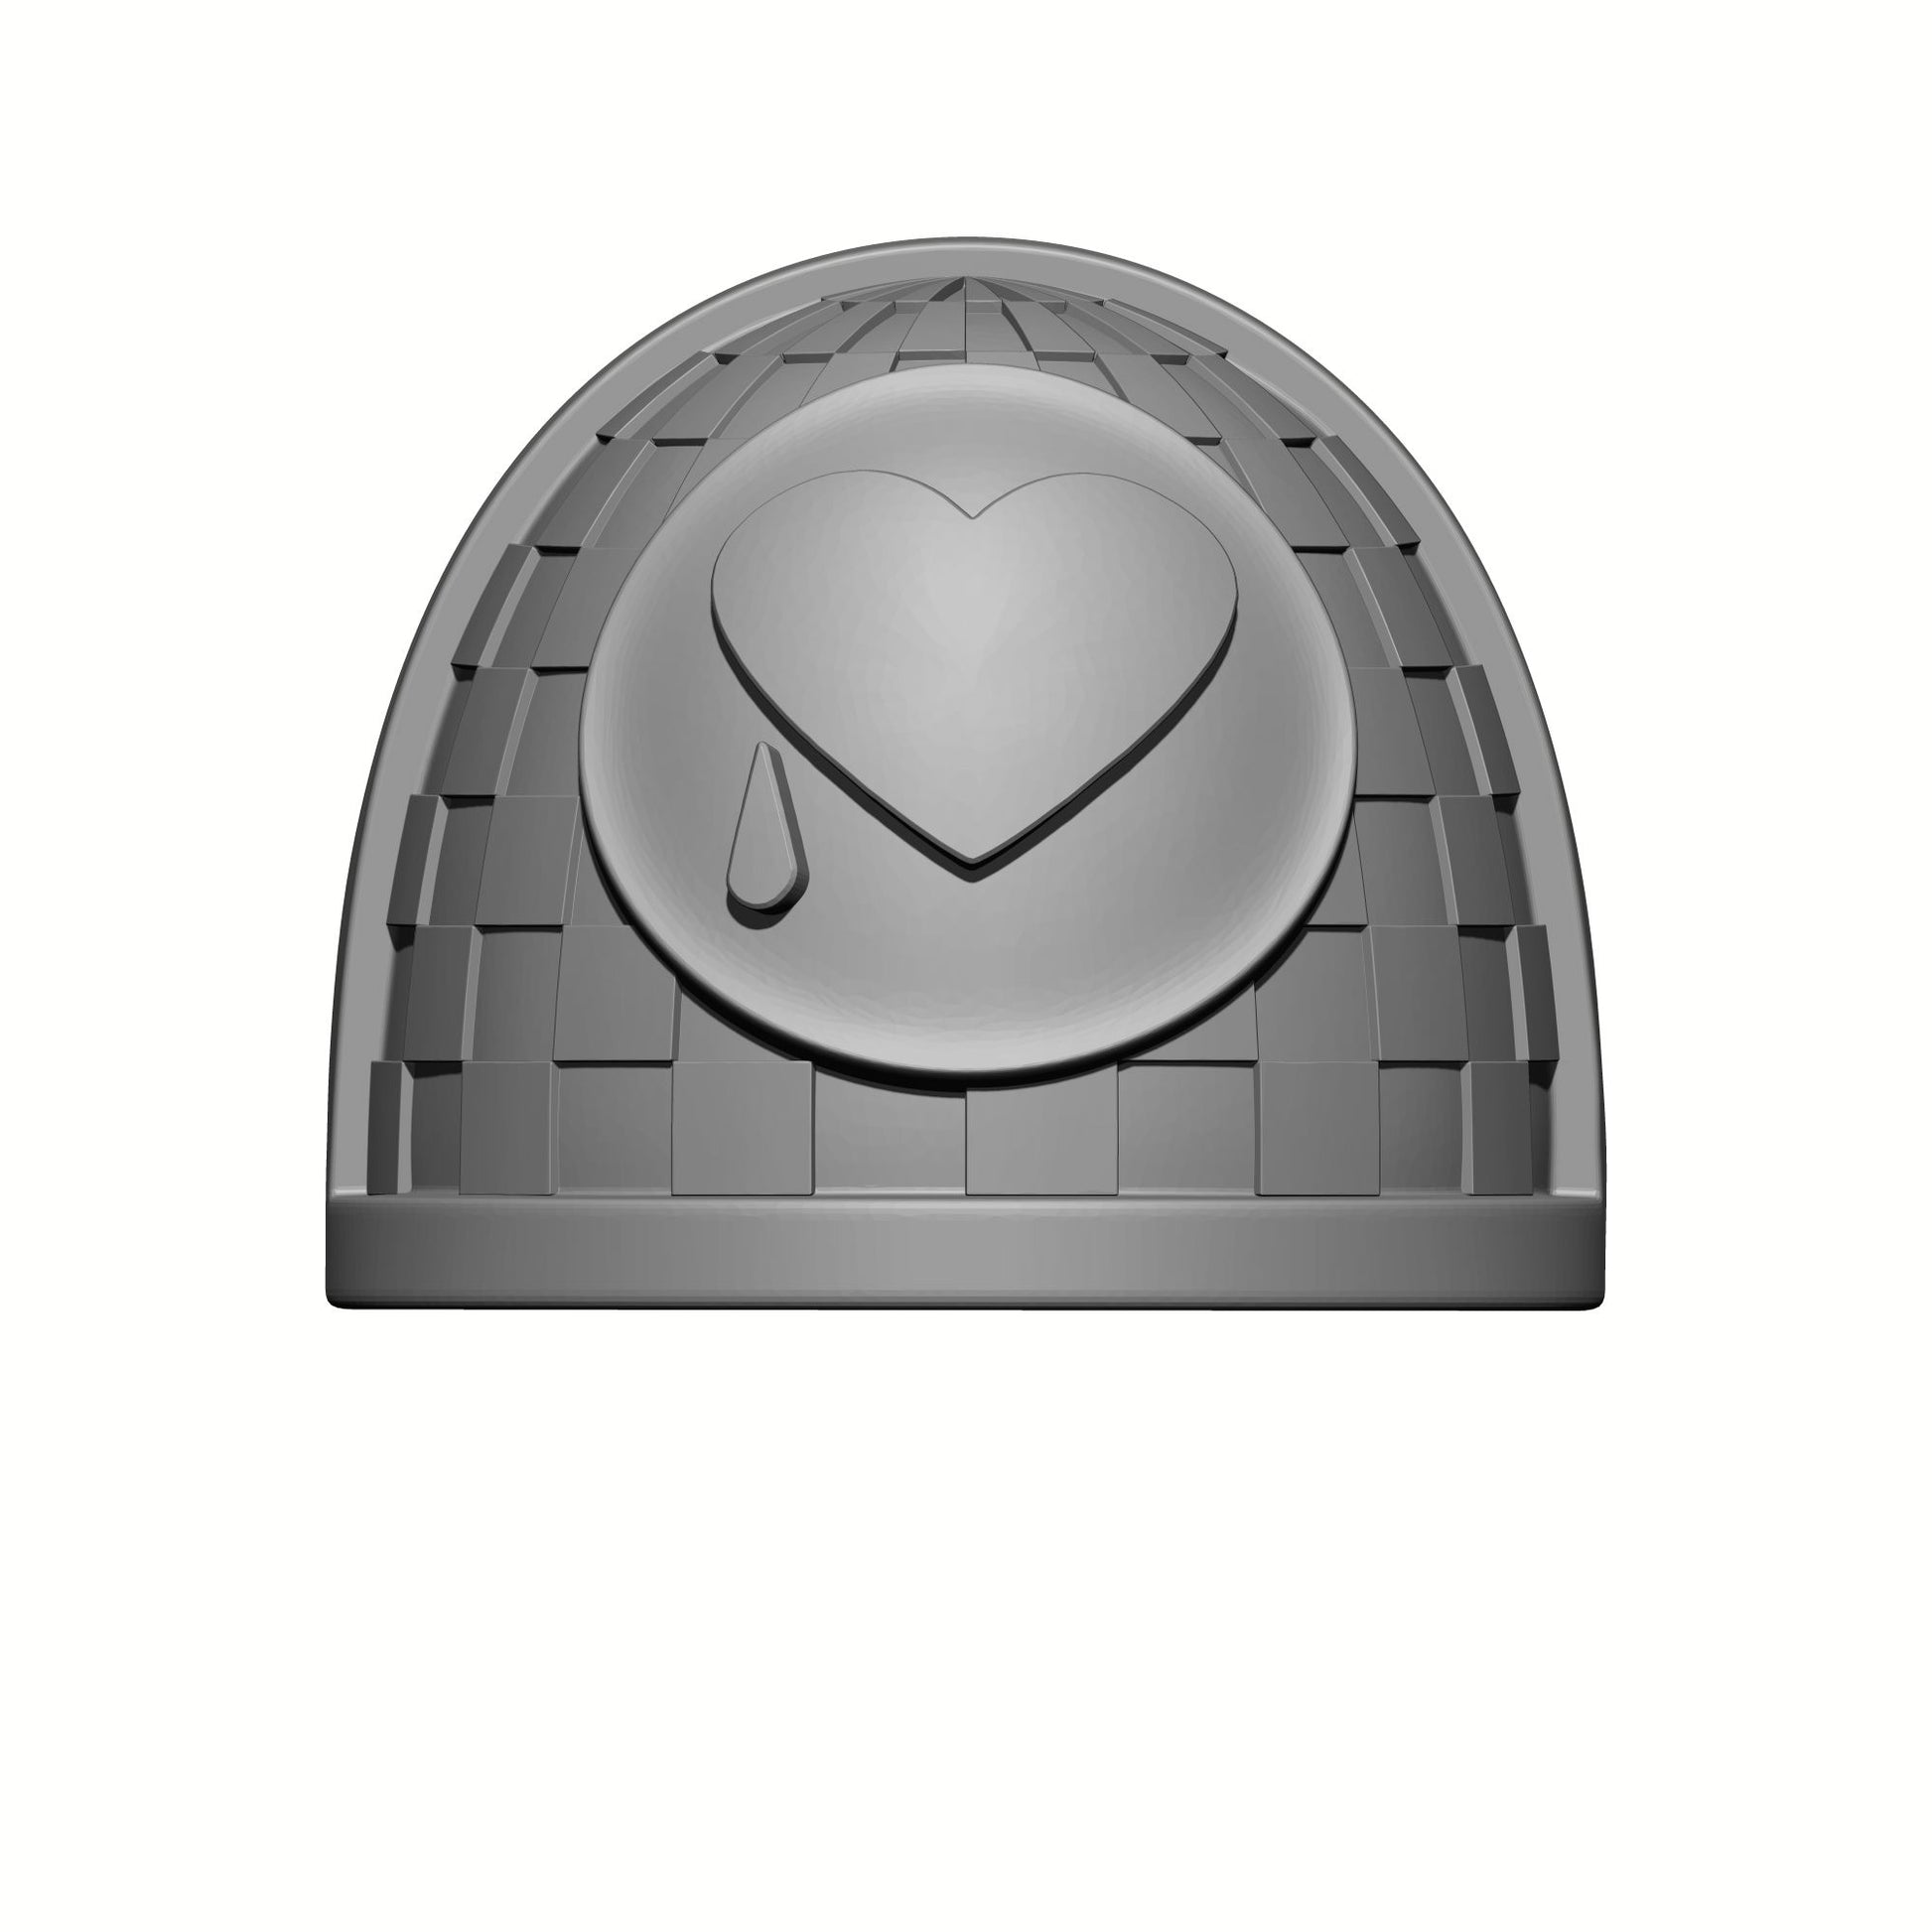 Lamenters Chapter Mark VII Shoulder Pad with a Flat Decal Compatible with McFarlane Toys Space Marine Action Figures